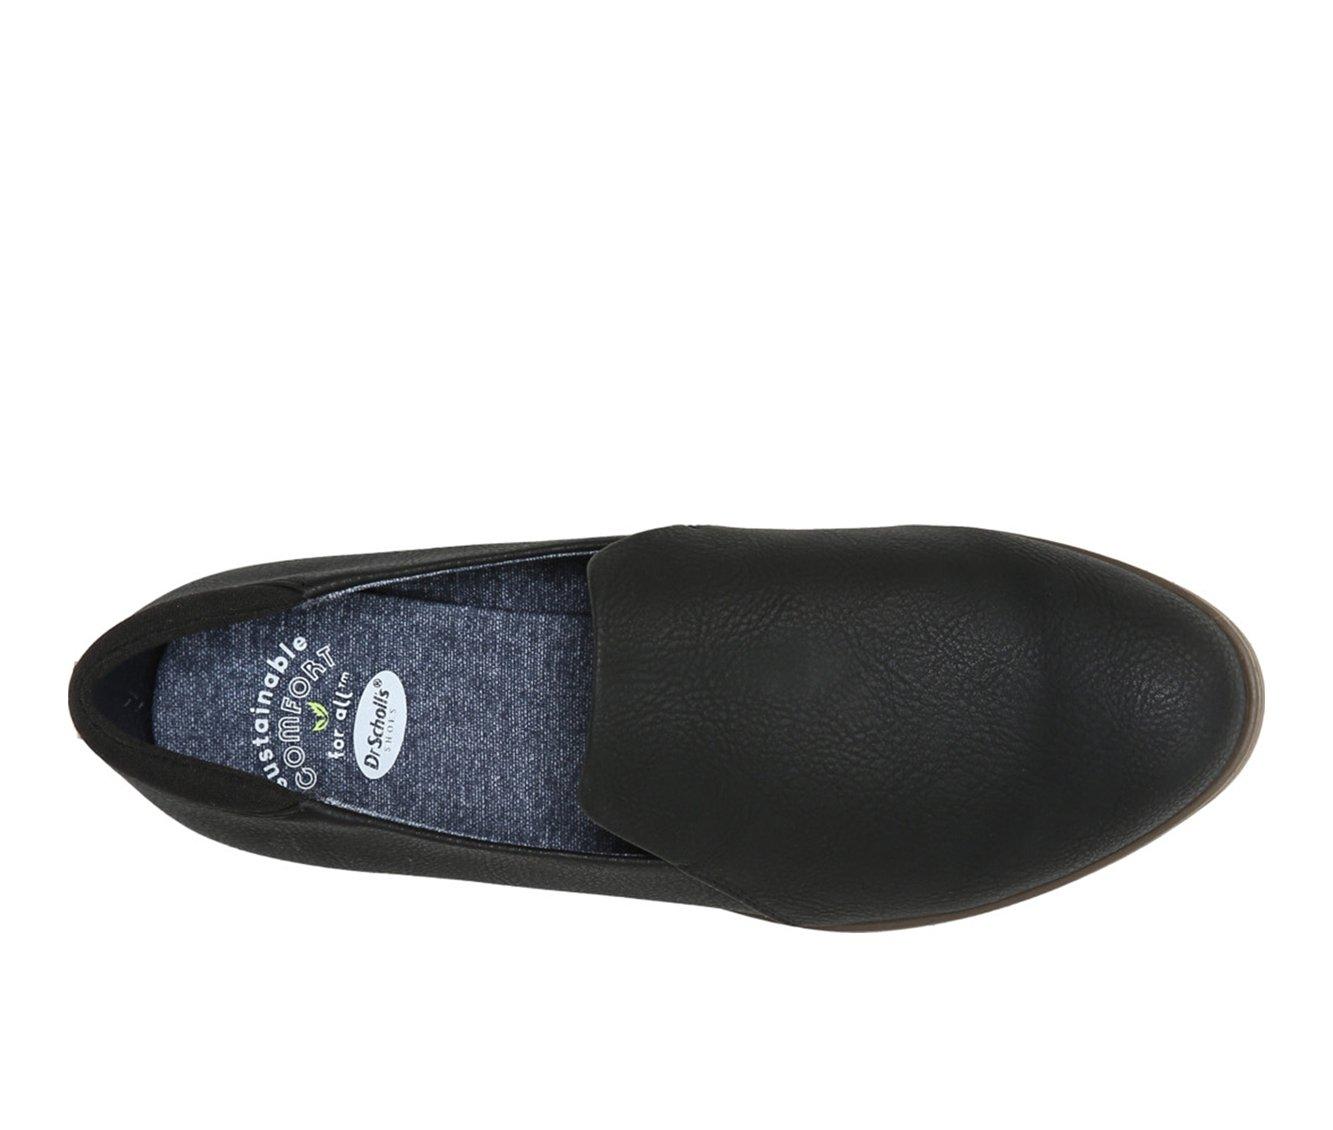 Women's Dr. Scholls Rate Loafers Loafers